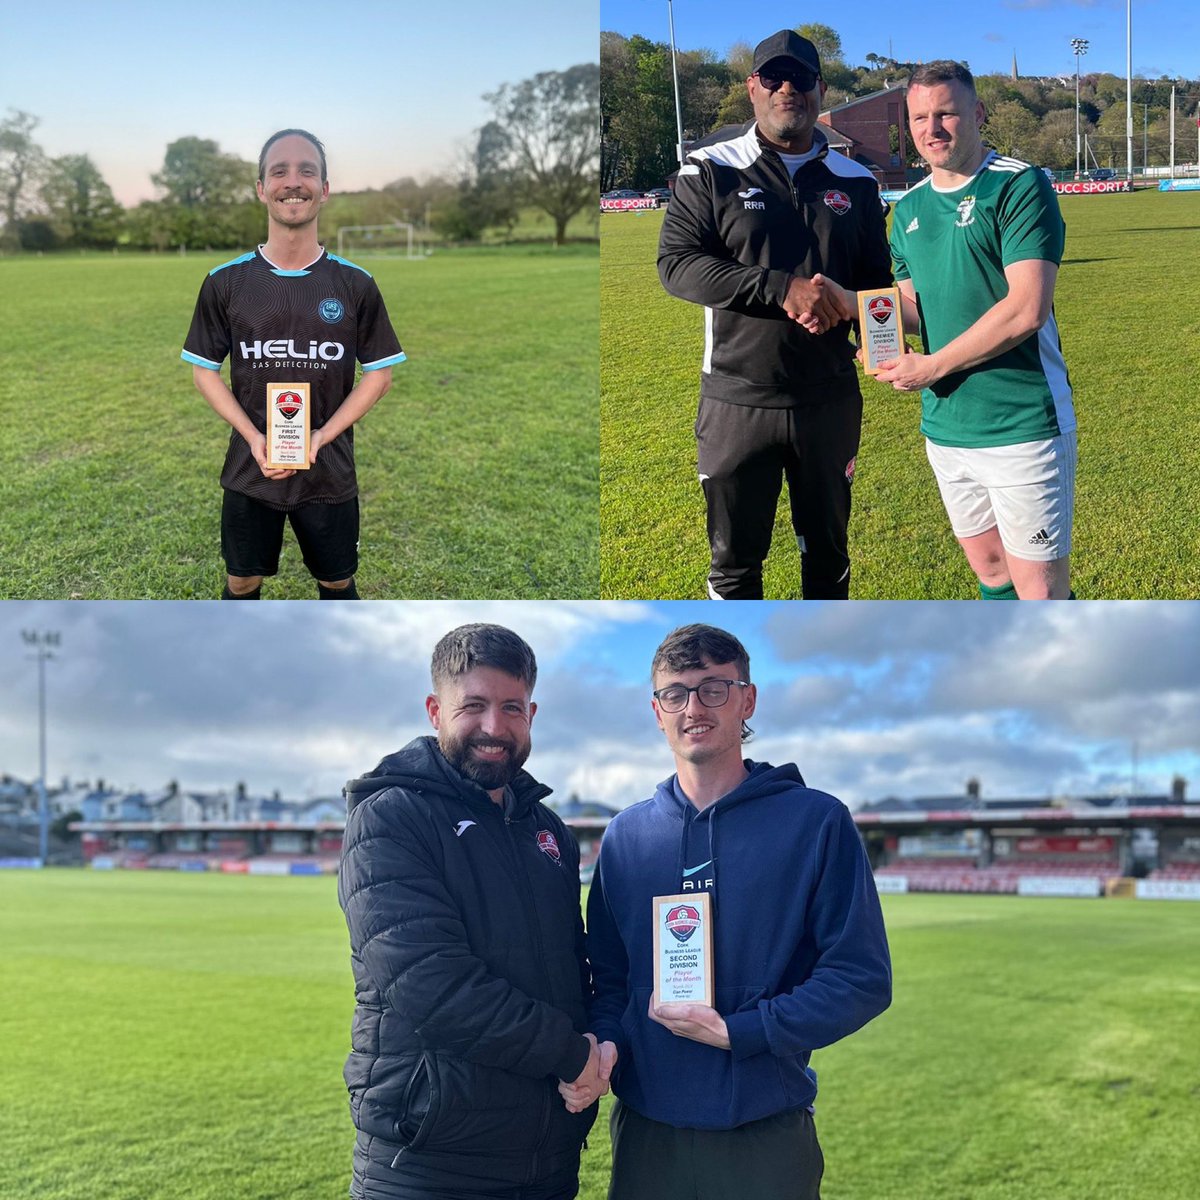 Our 3 March POTMs winners being presented with their awards recently 🫡 Top left: Vitor Granja, with no sign of Committee Member Jamie O’Sullivan🤔 Top right: Jamie Murphy with his bestie Ray Anthony. Bottom: Cian Power & Peter Travers, both on the sacred turf of Turners Cross